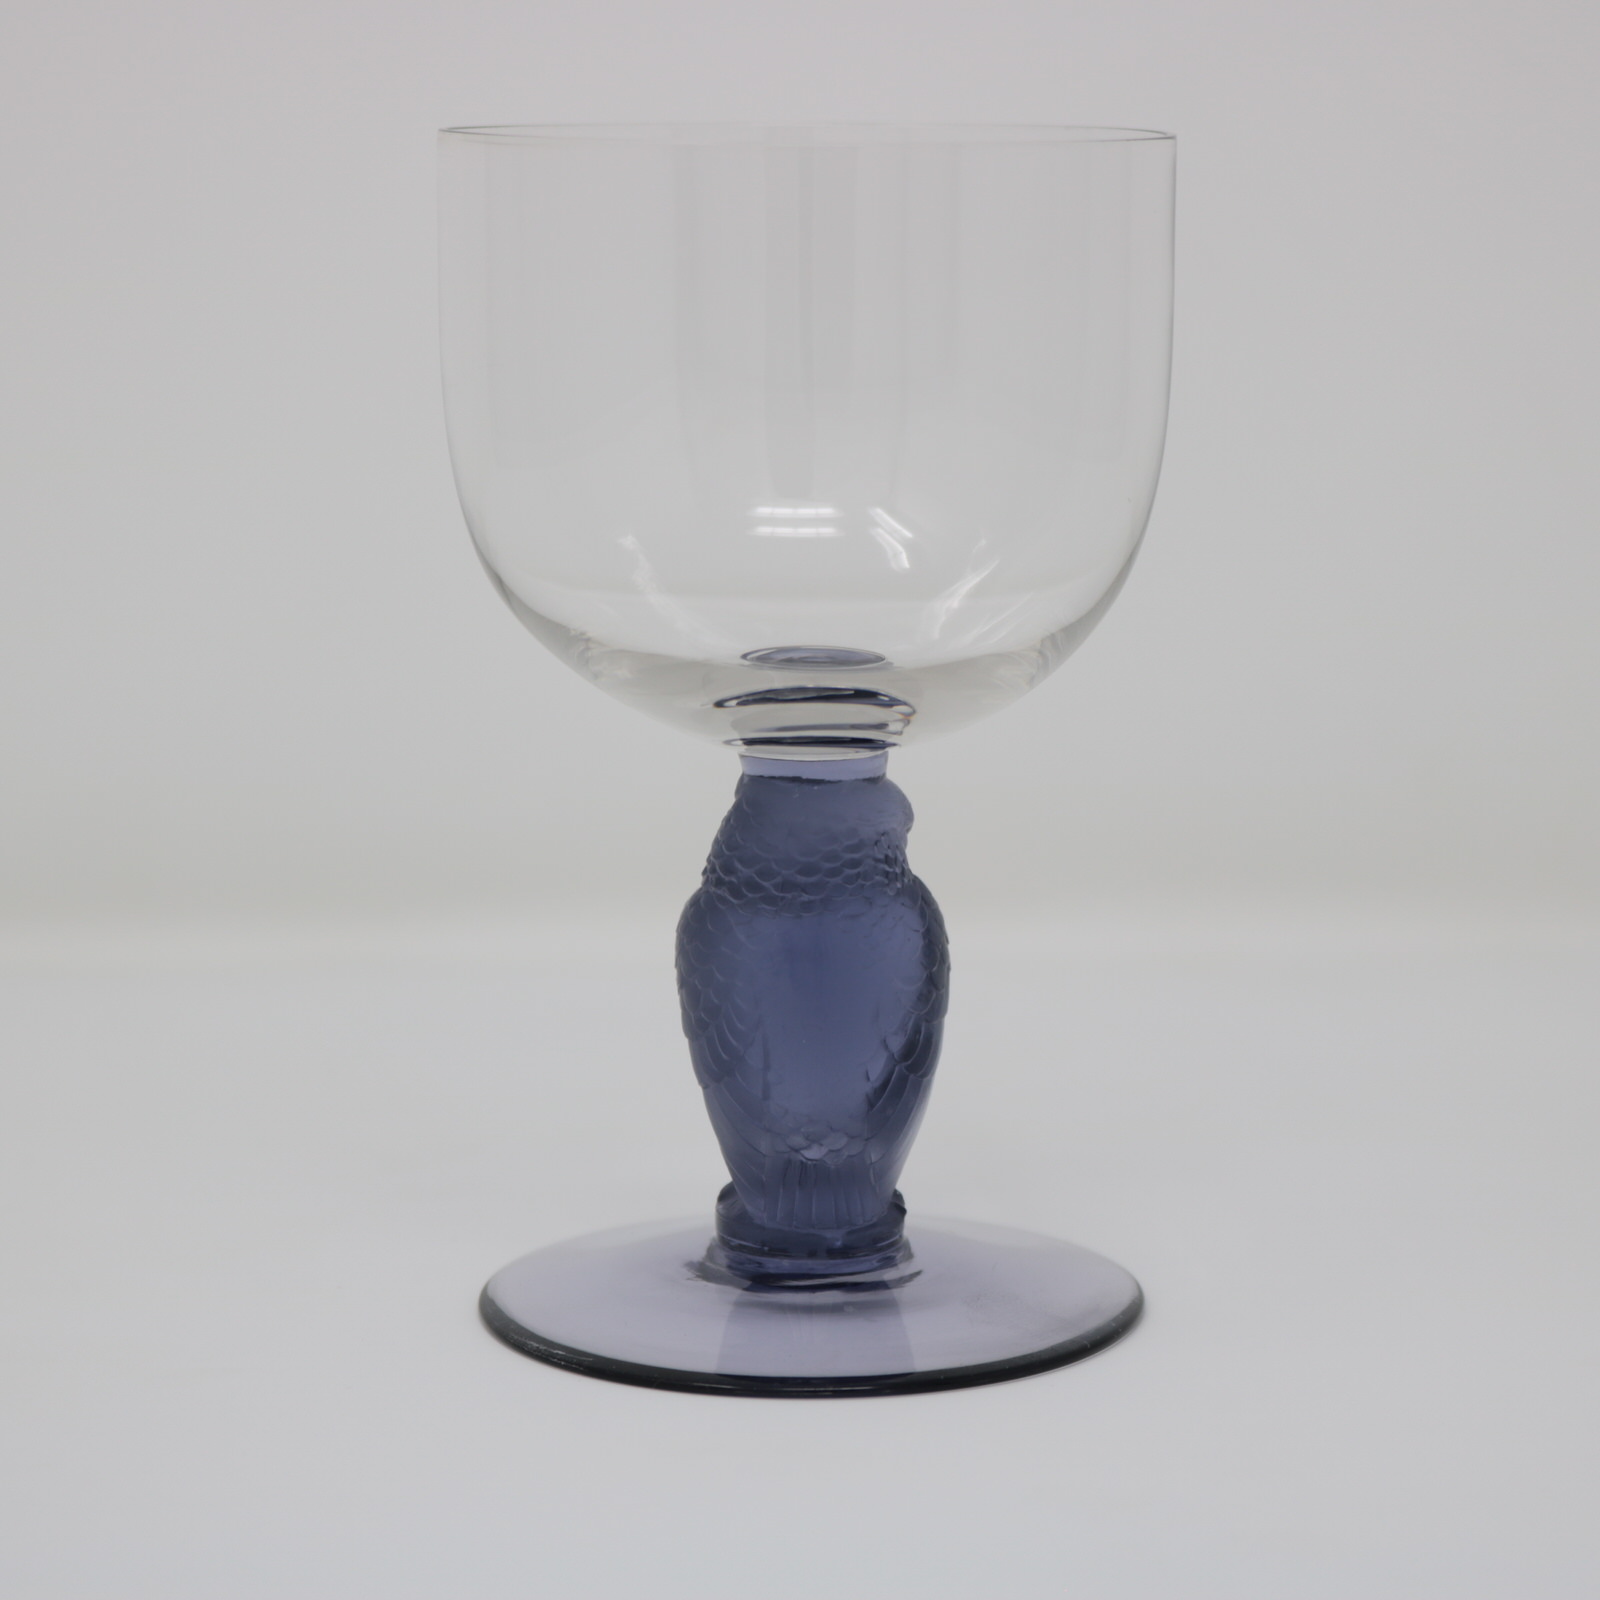 Rene Lalique Glass 'Rapace' Drinking Glass - Image 4 of 9